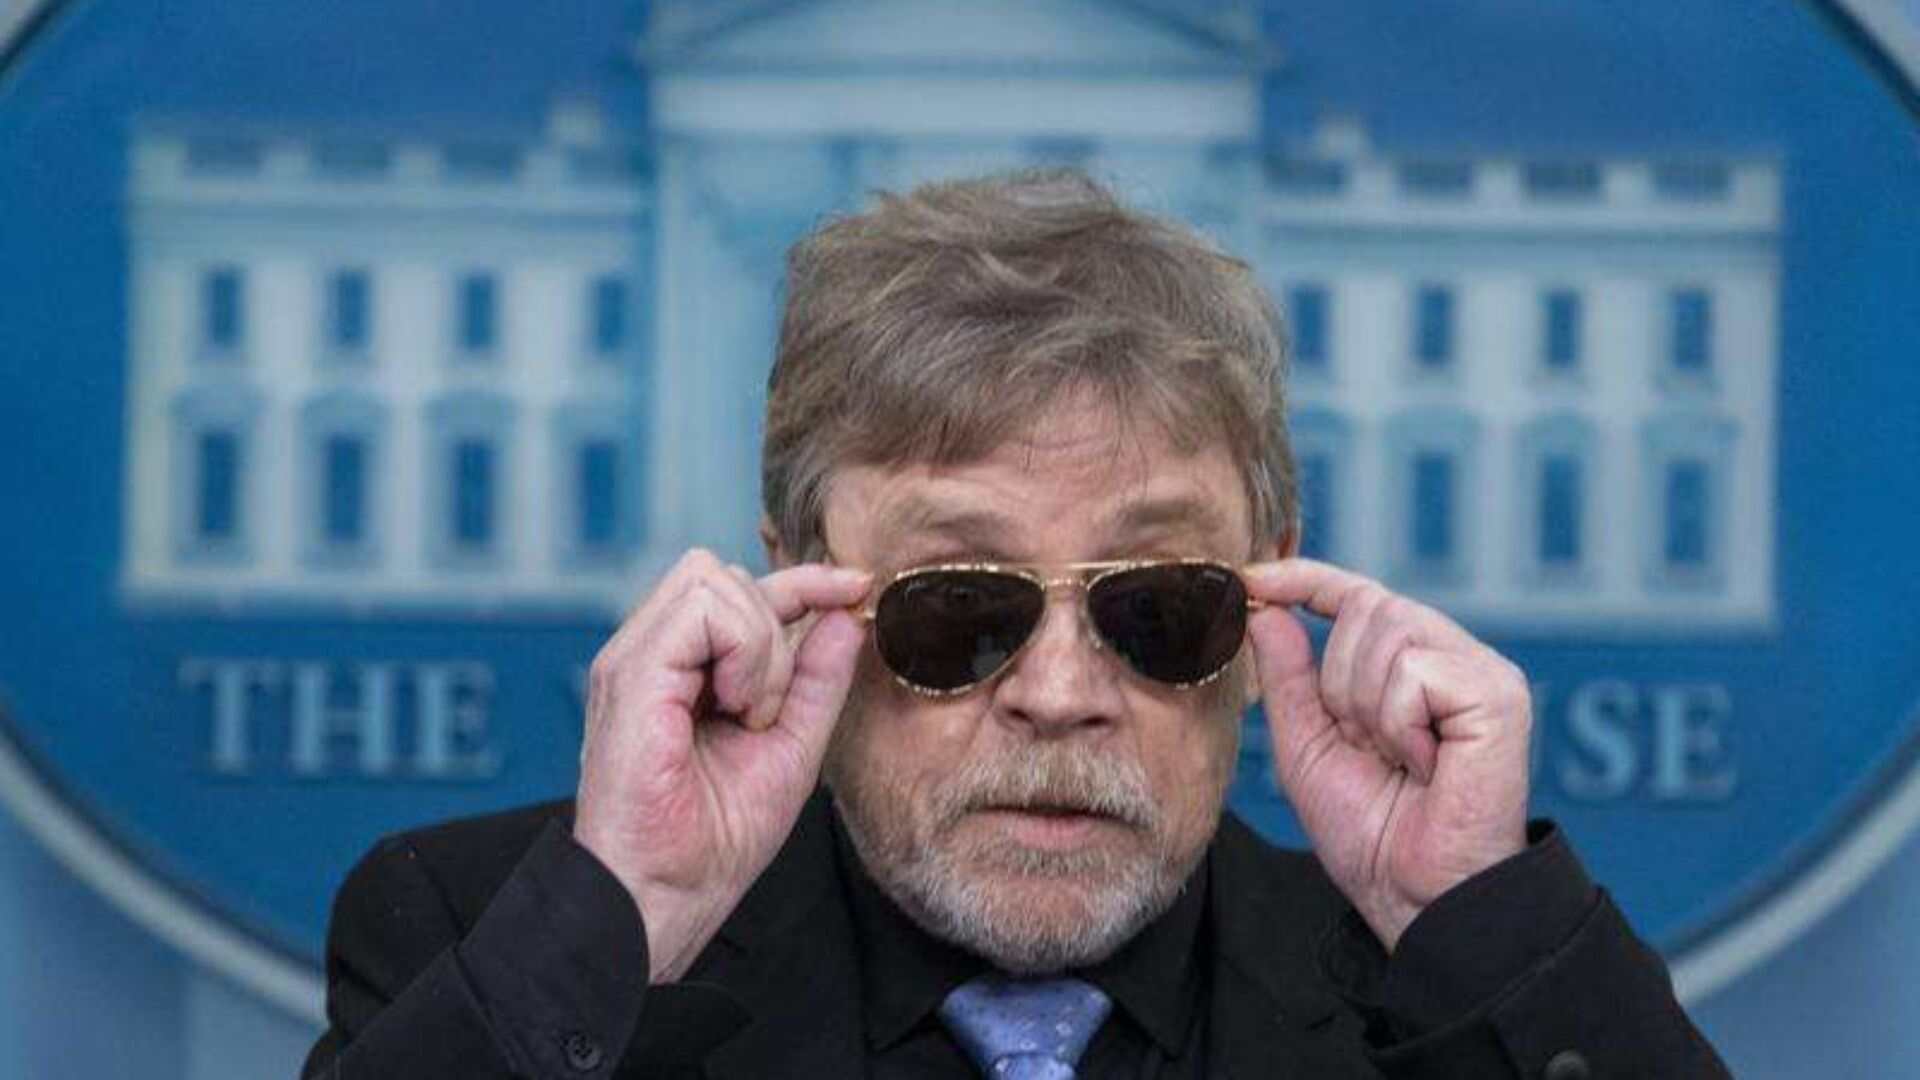 Star Wars Actor Mark Hamill Makes Surprise Appearance in White House Briefing Room